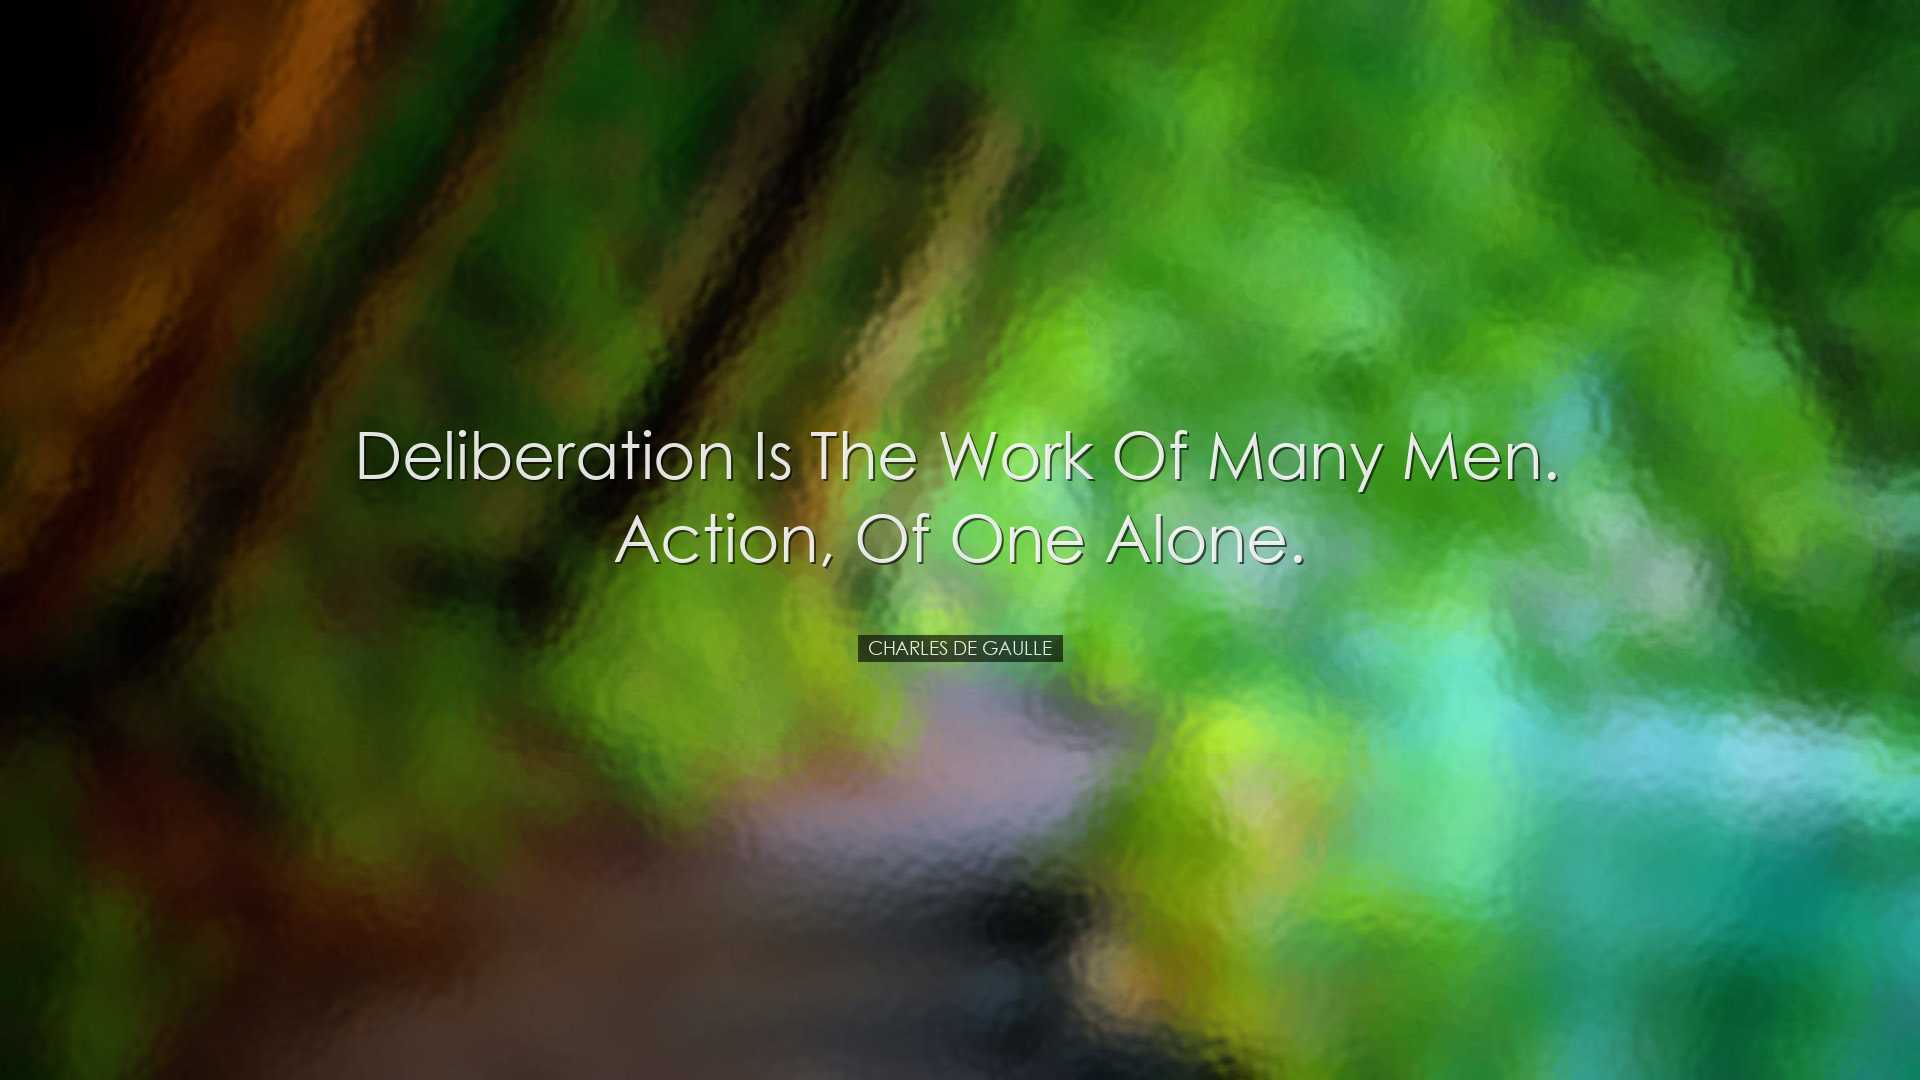 Deliberation is the work of many men. Action, of one alone. - Char